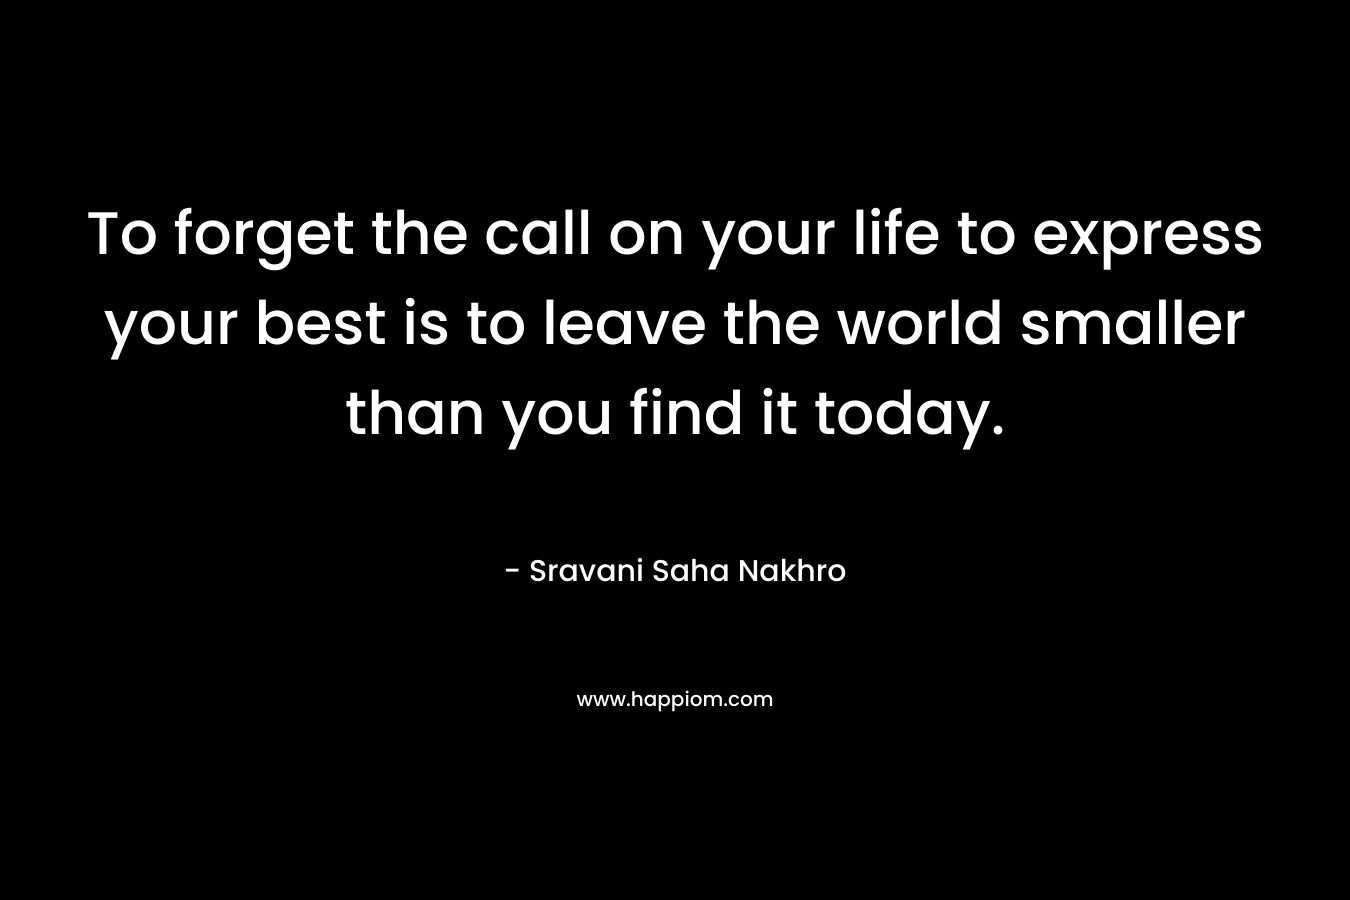 To forget the call on your life to express your best is to leave the world smaller than you find it today.